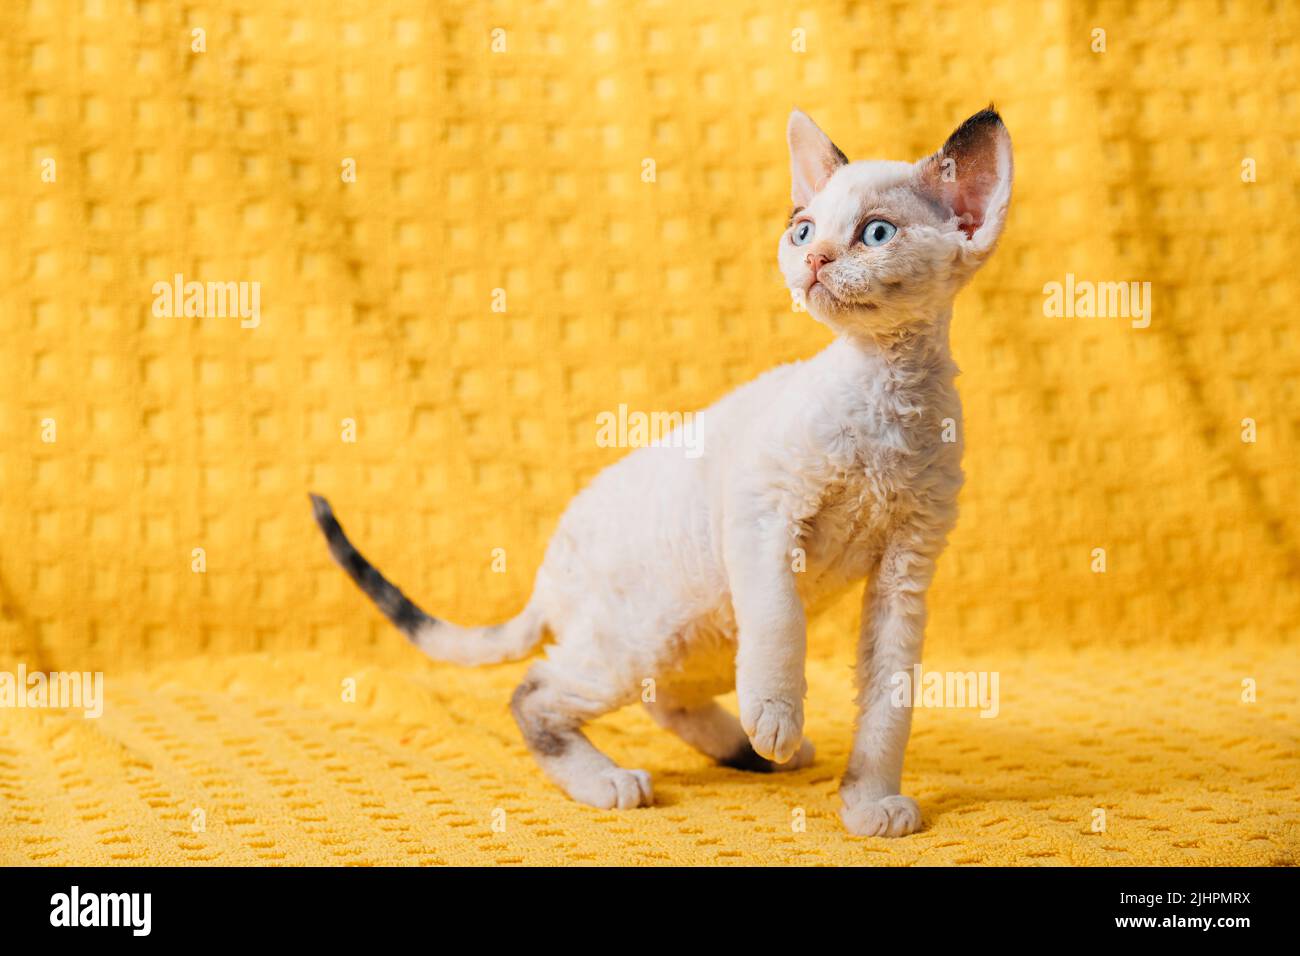 Funny Small Little White Devon Rex Kitten Kitty Resting Posing. Short-haired Cat Of English Breed On Yellow Plaid Background. Shorthair Pet Cat Stock Photo